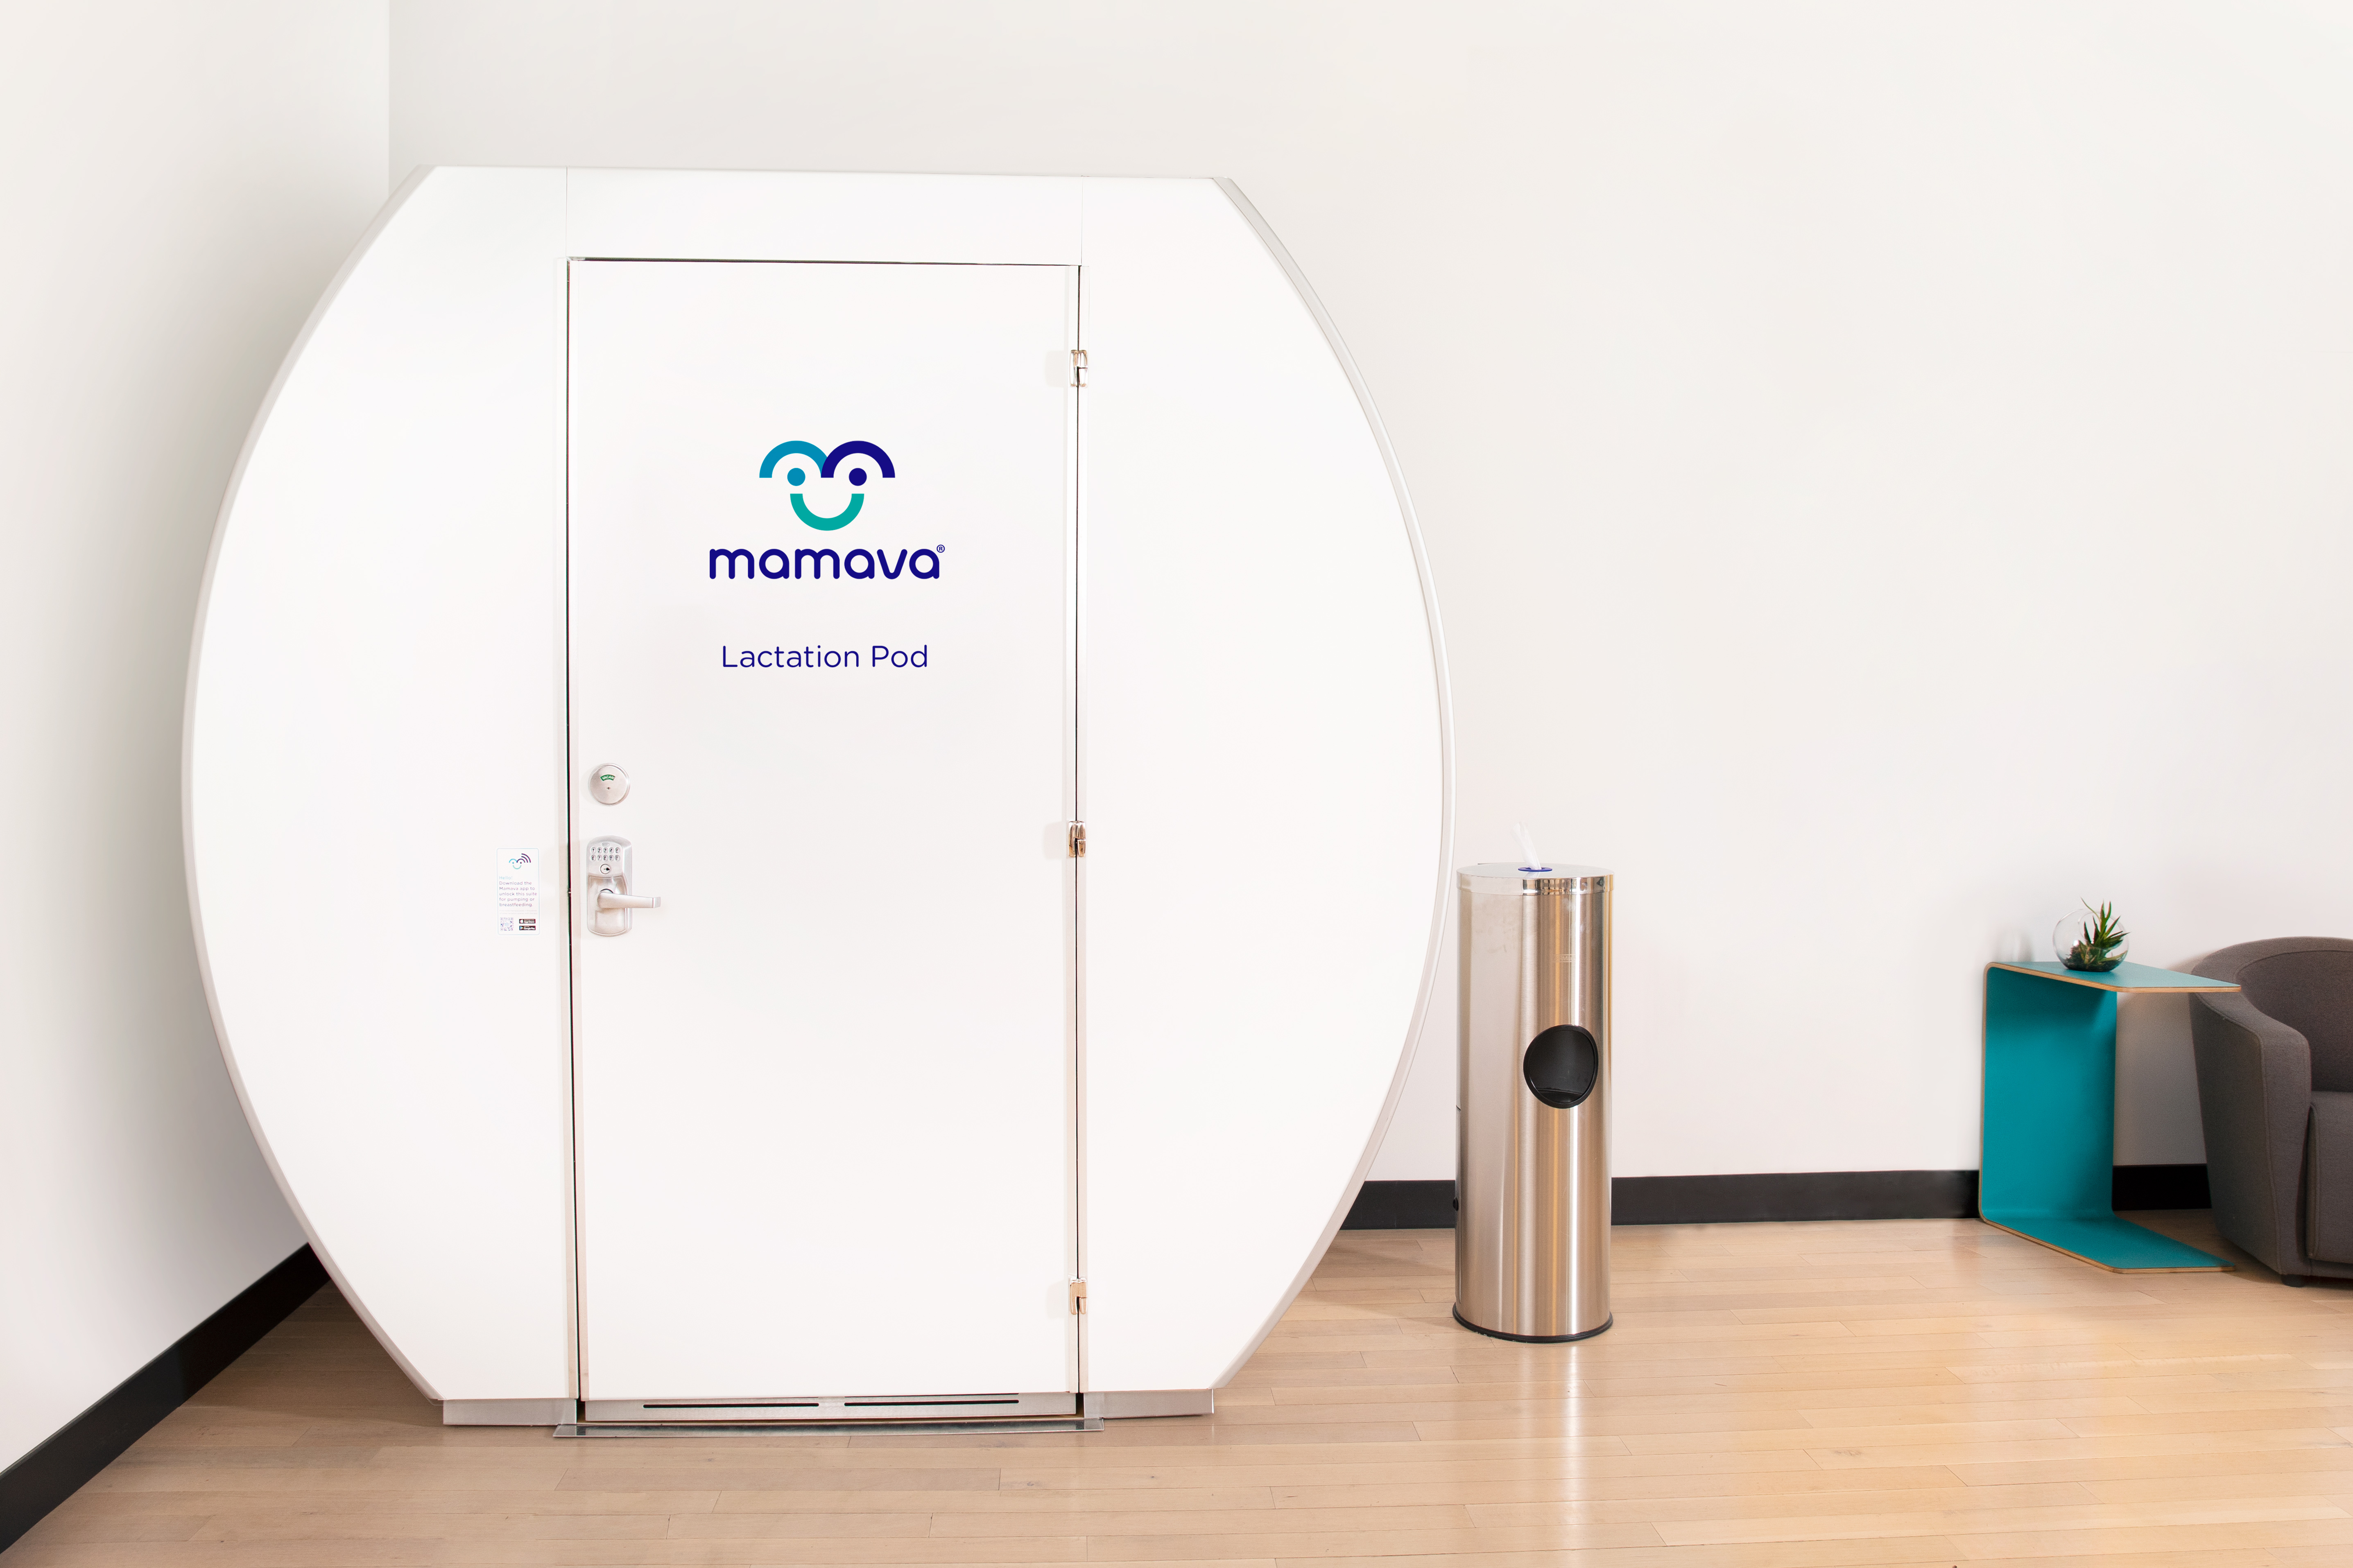 Mamava, the lactation suite category creator, has announced that their lactation pods are now available in all 50 states. Mamava has changed the face of public transportation hubs and private businesses with an iconic pod-shaped design created to be a calming oasis for mothers, a billboard for breastfeeding support, and a flexible, easy-to-implement solution for facilities and employers. 